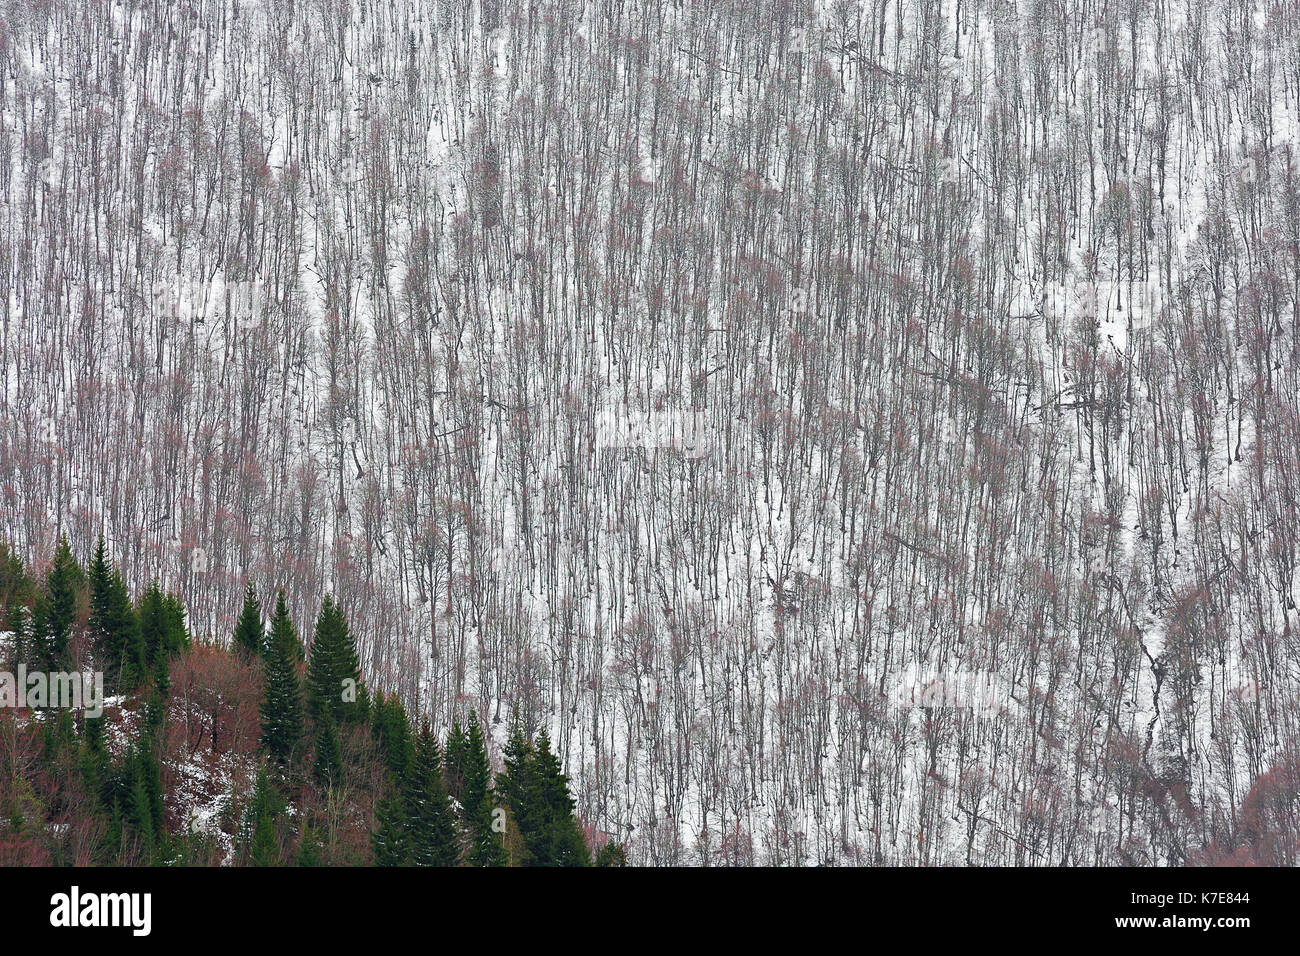 Winter scene over the trees on the side of the Caucasus Mountains in Georgia. Stock Photo